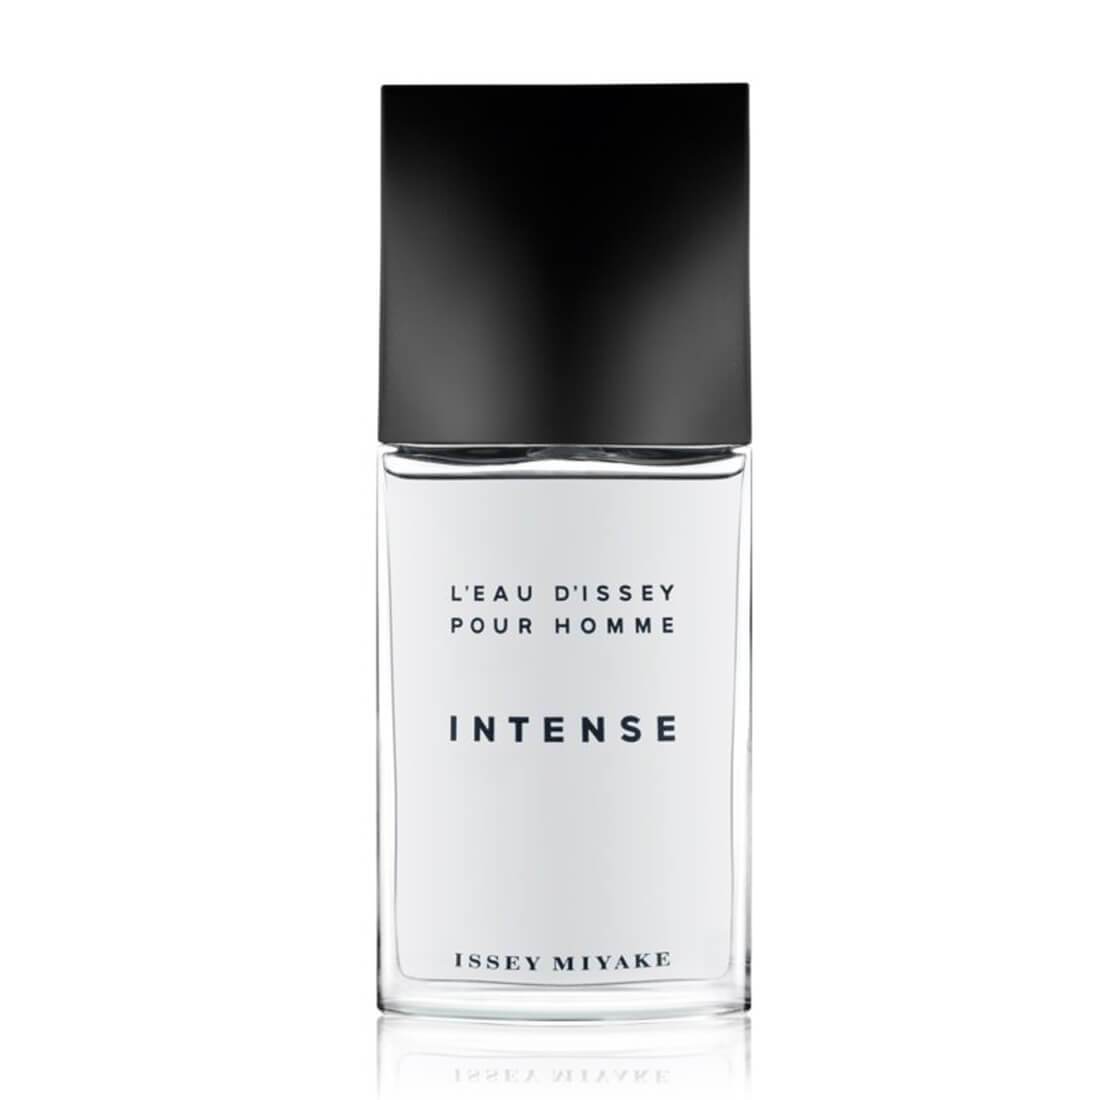 Issey Miyake Pour Homme Intense EDT Perfume - 125ml